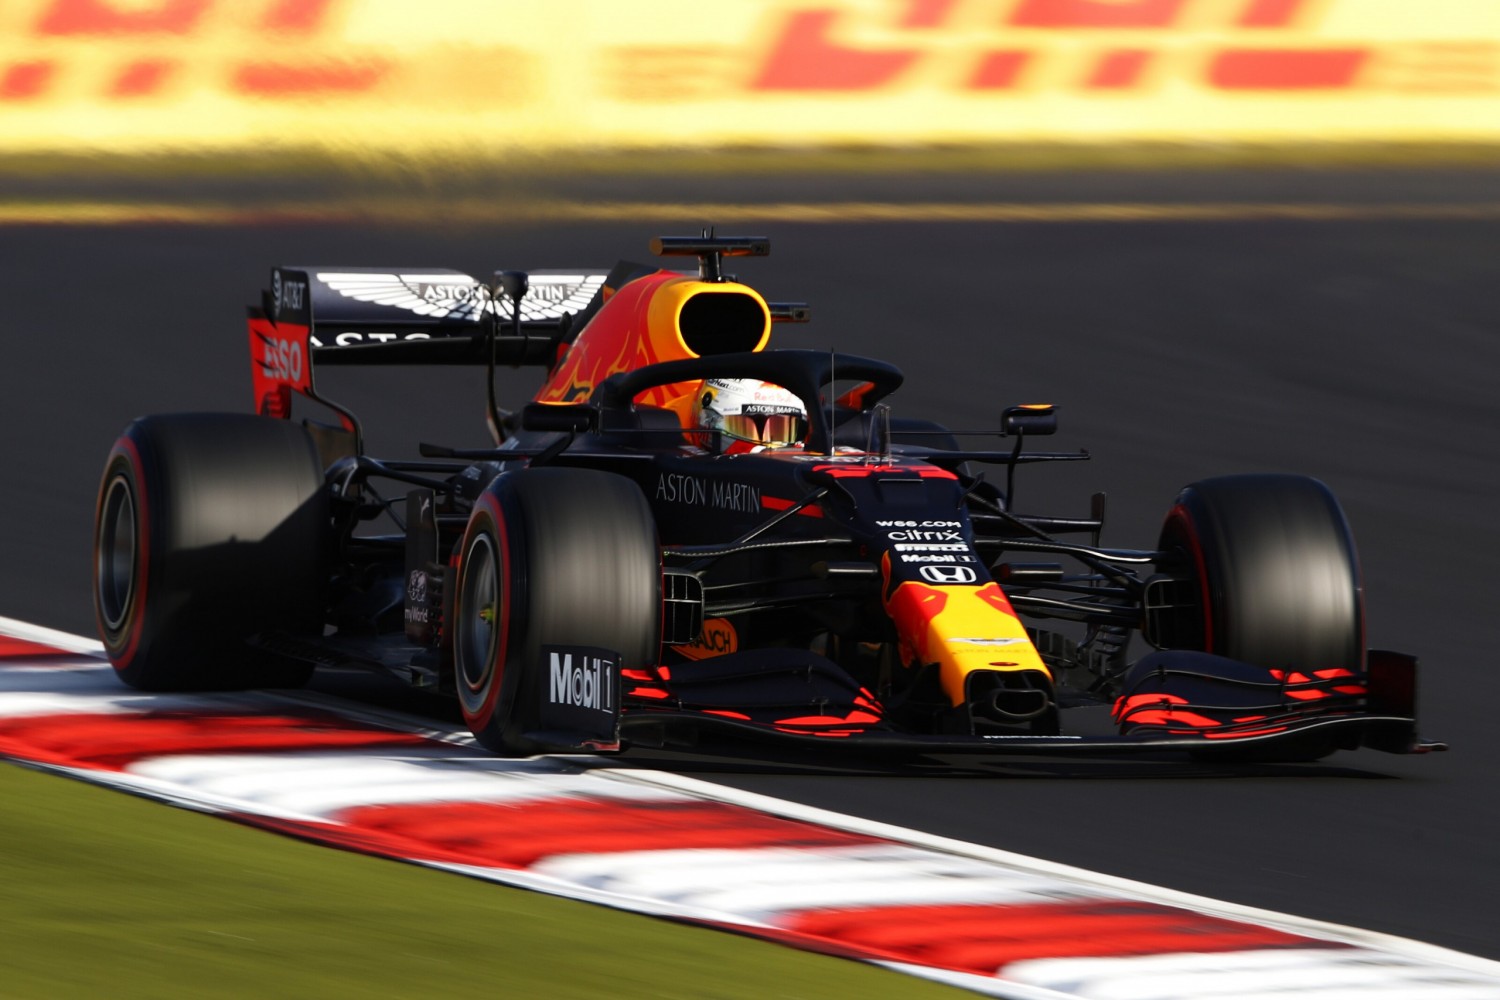 2021 Red Bull RB16B to retain 60% of the 2020 RB16